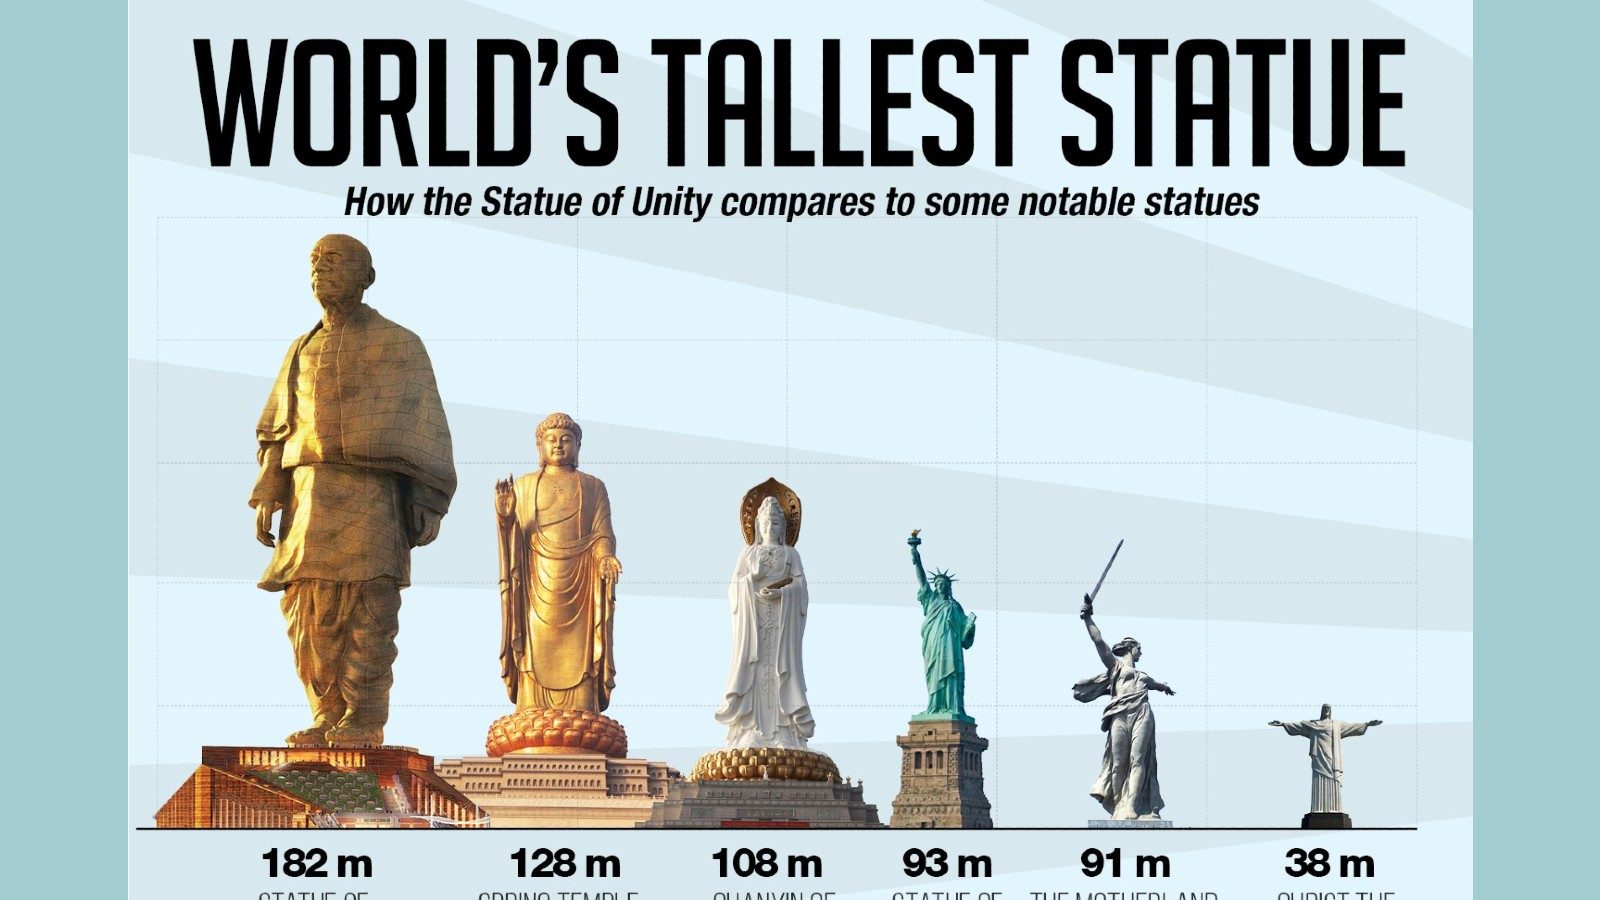 IN PICS: Statue of Unity, The World's Tallest Statue of Sardar ...